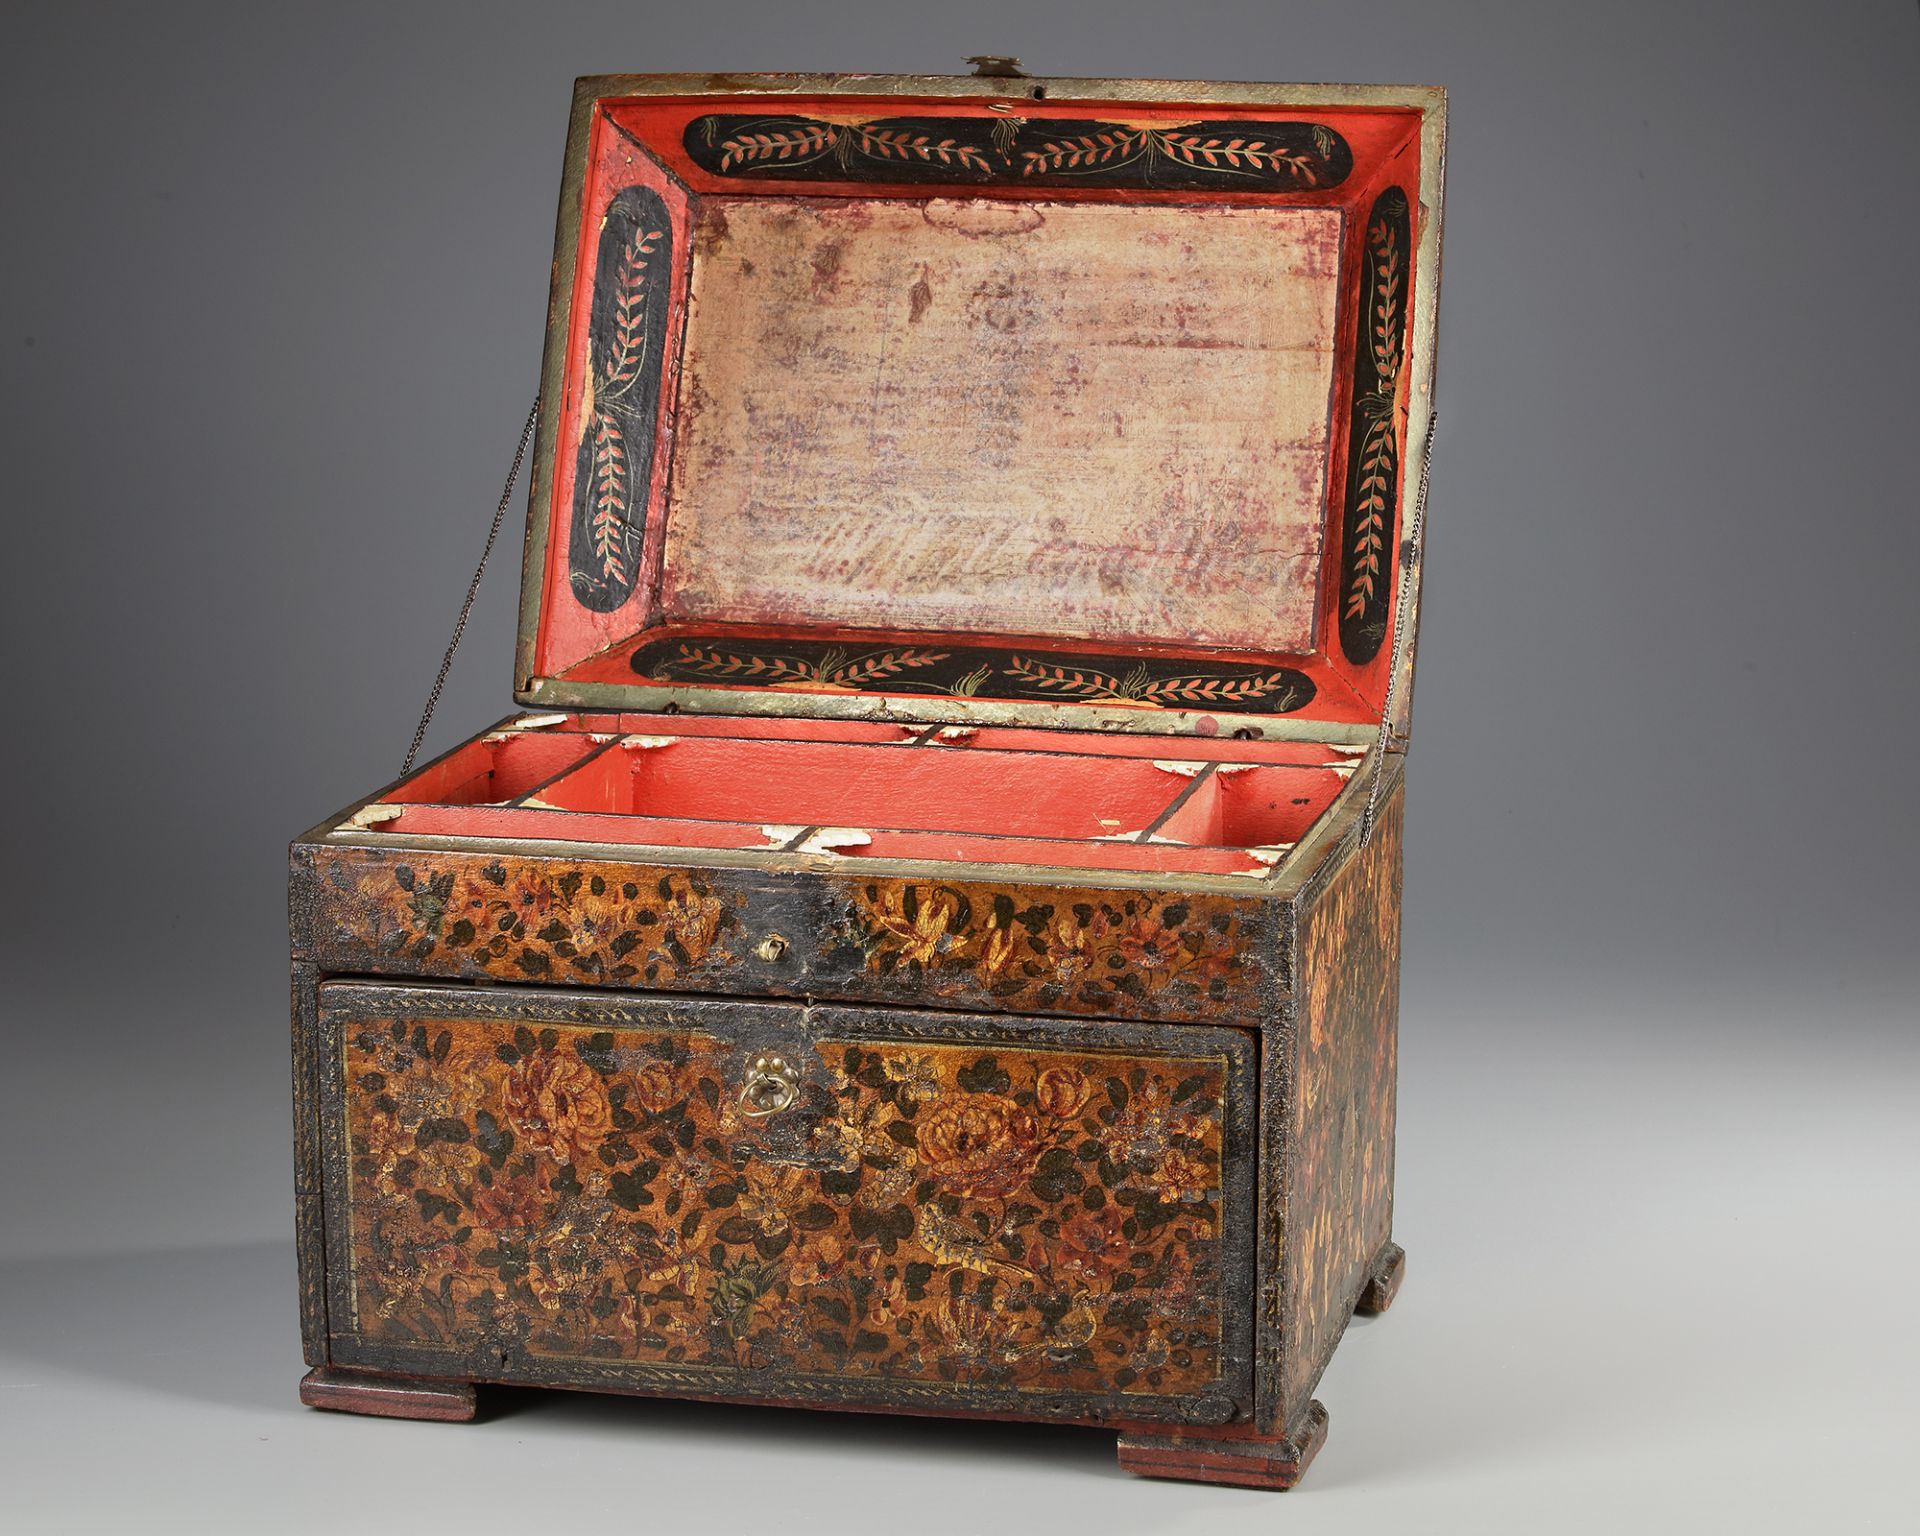 A PERSIAN WOODEN CHEST WITH DRAWERS - Image 2 of 5